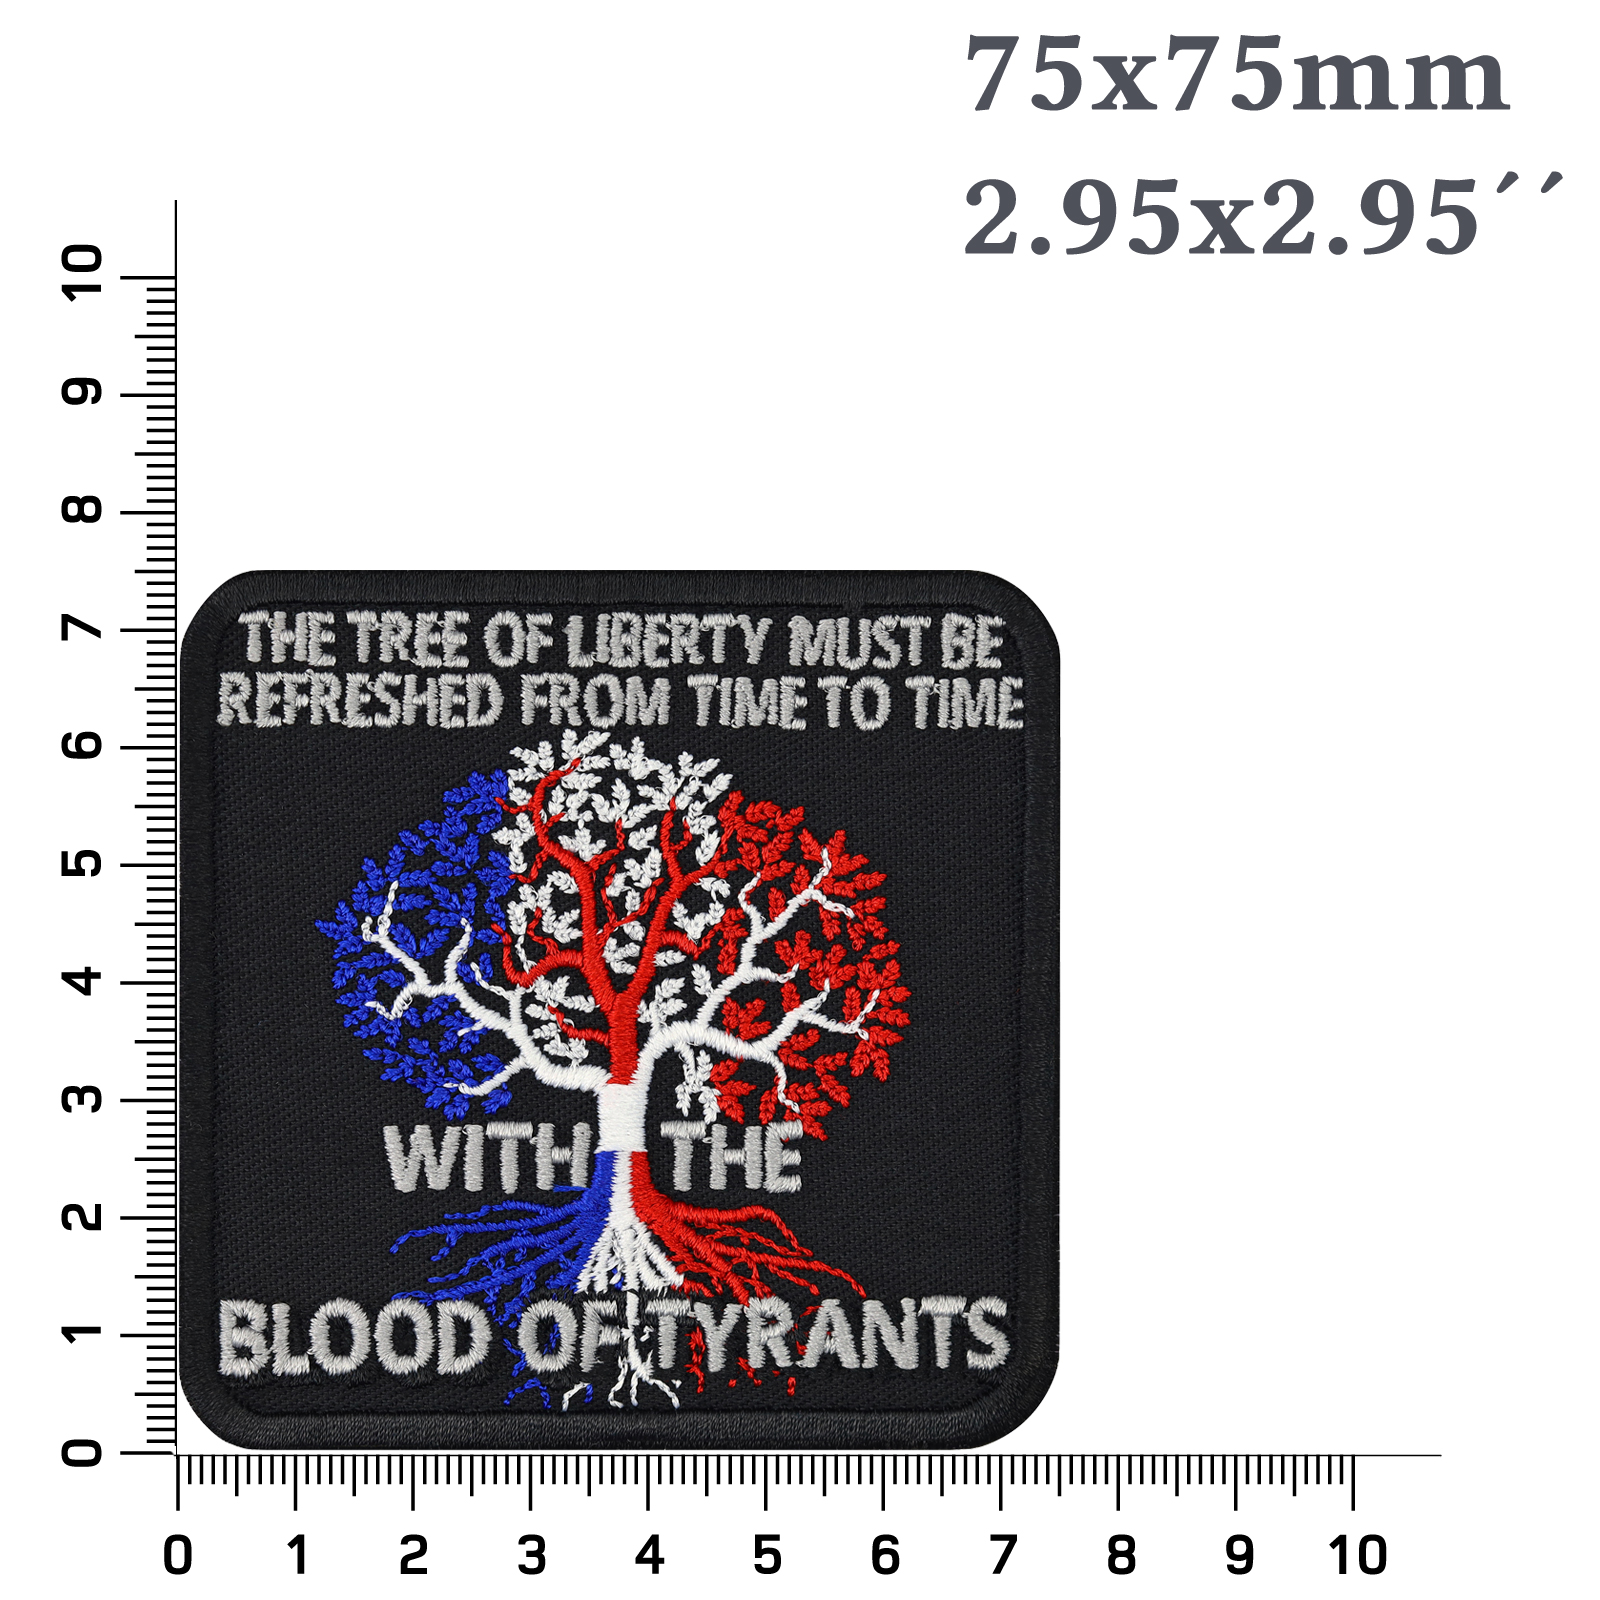 The tree of liberty USA - Patch